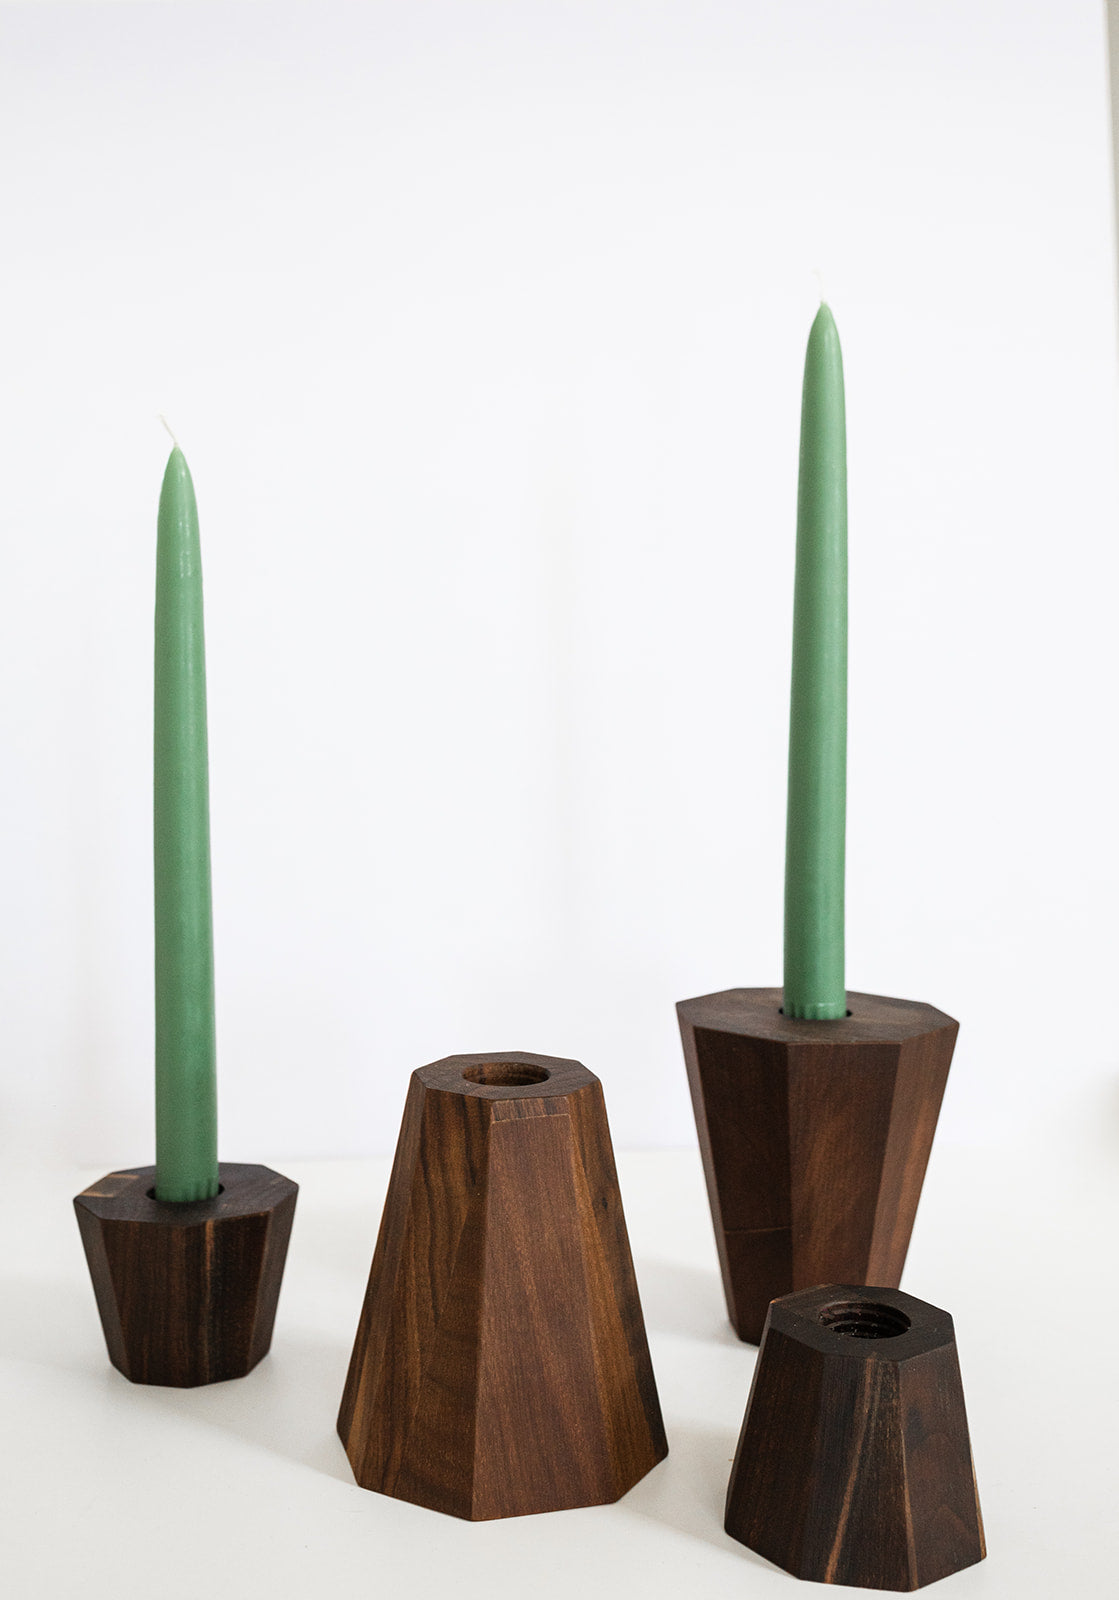 The Reversible Wooden Candle Holder